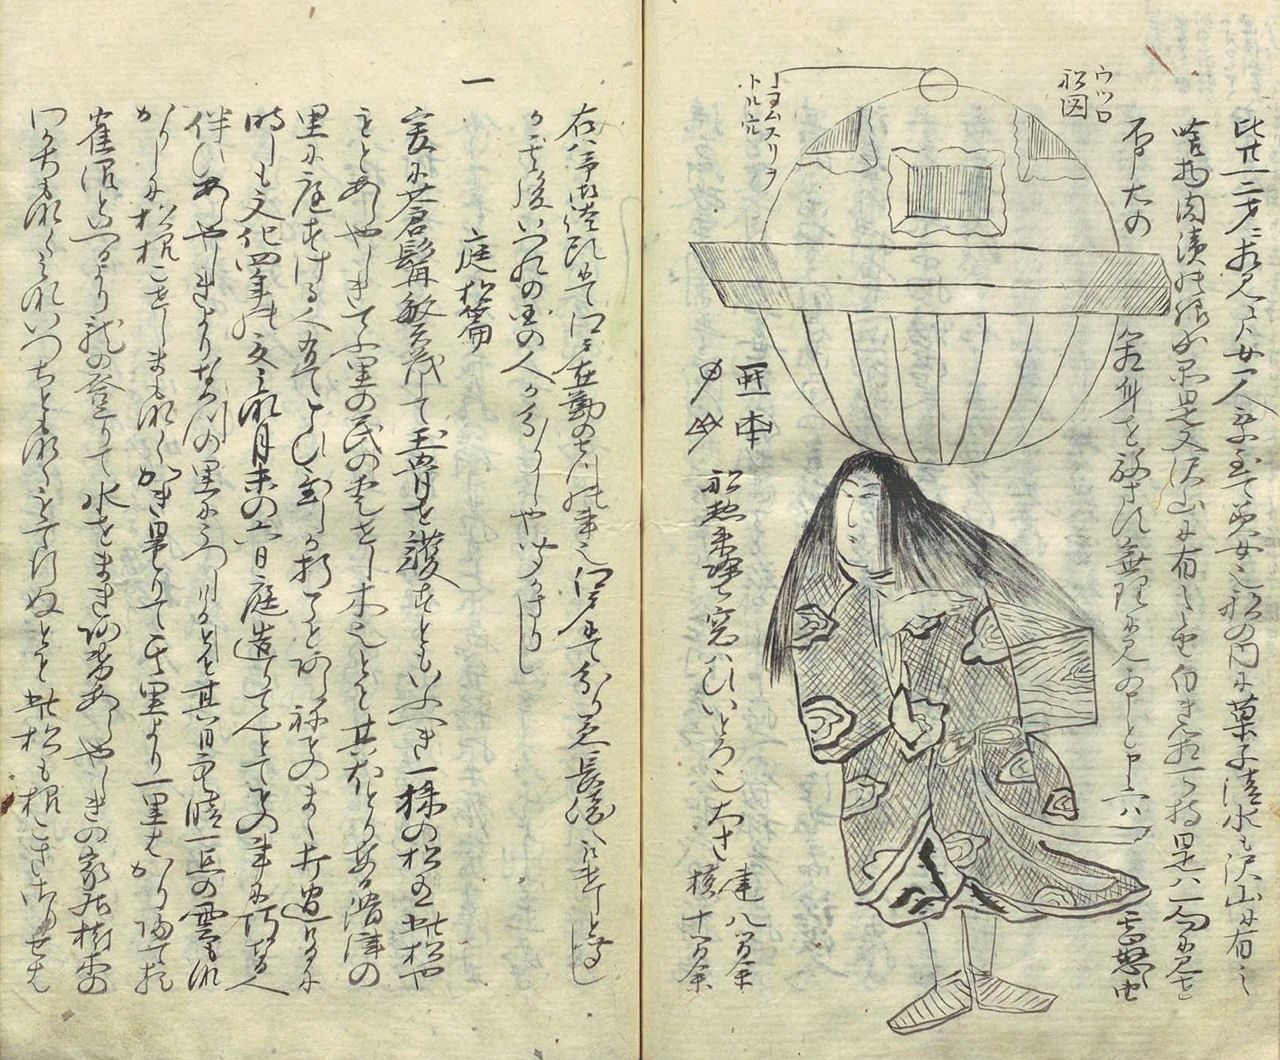 Utsuro-bune case: Earliest extraterrestrial encounter with a "hollow ship" and an alien visitor?? 3